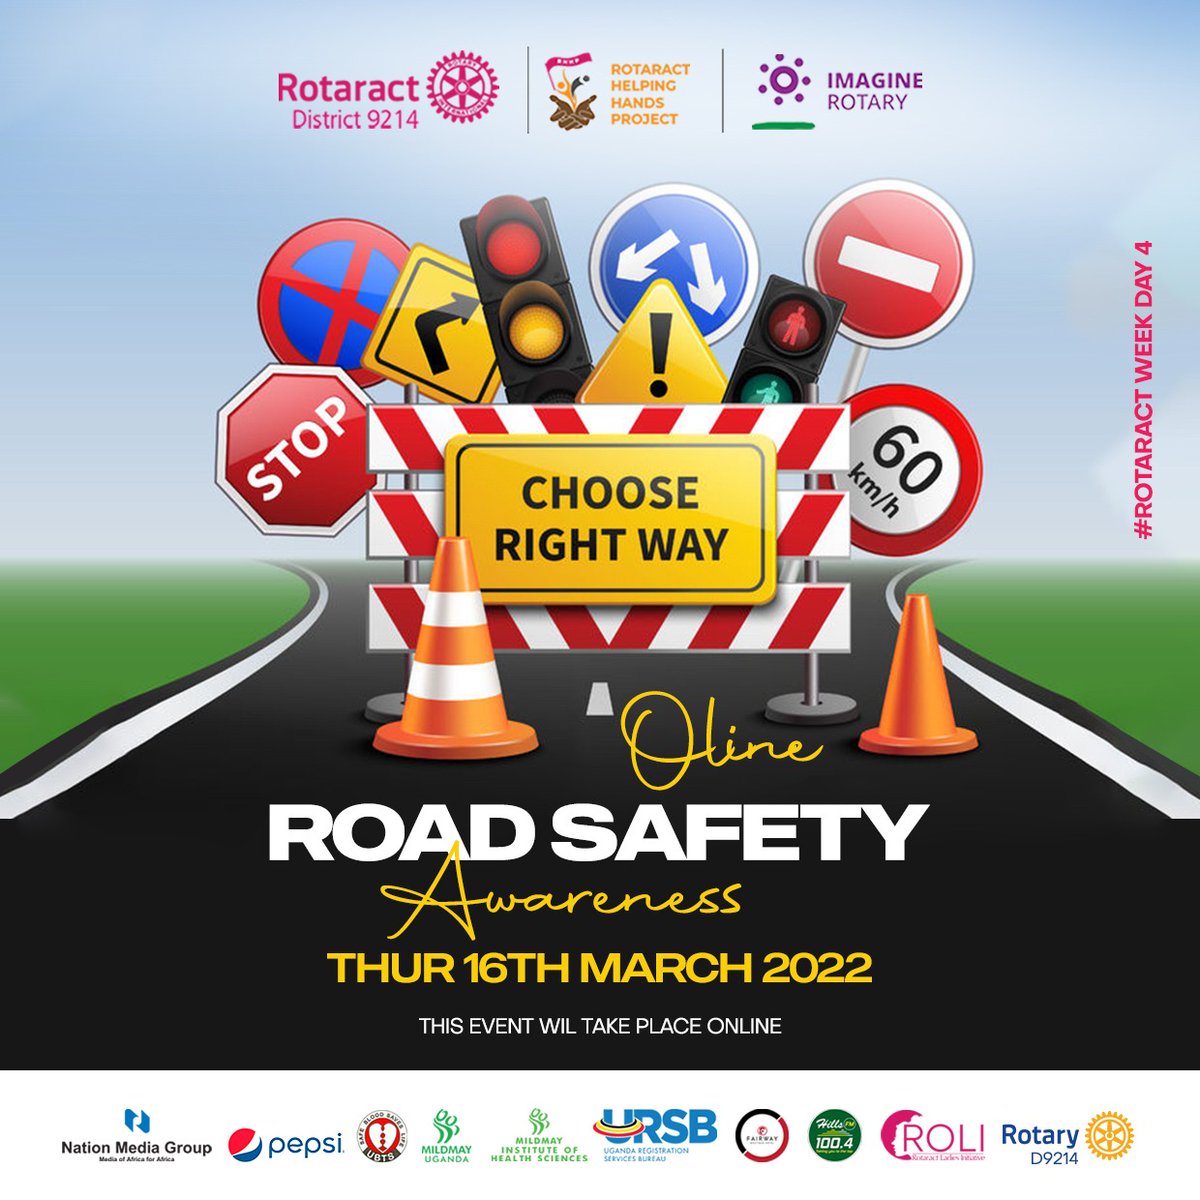 Did you know that in Uganda out of 100,000 people, 29 die from road accidents? In honour of Rotaract week today we are sharing ways on how we can save more lives. Show up and support this cause. 
#Rotaractweek #worldrotaractweek   #imaginerotary #district9214